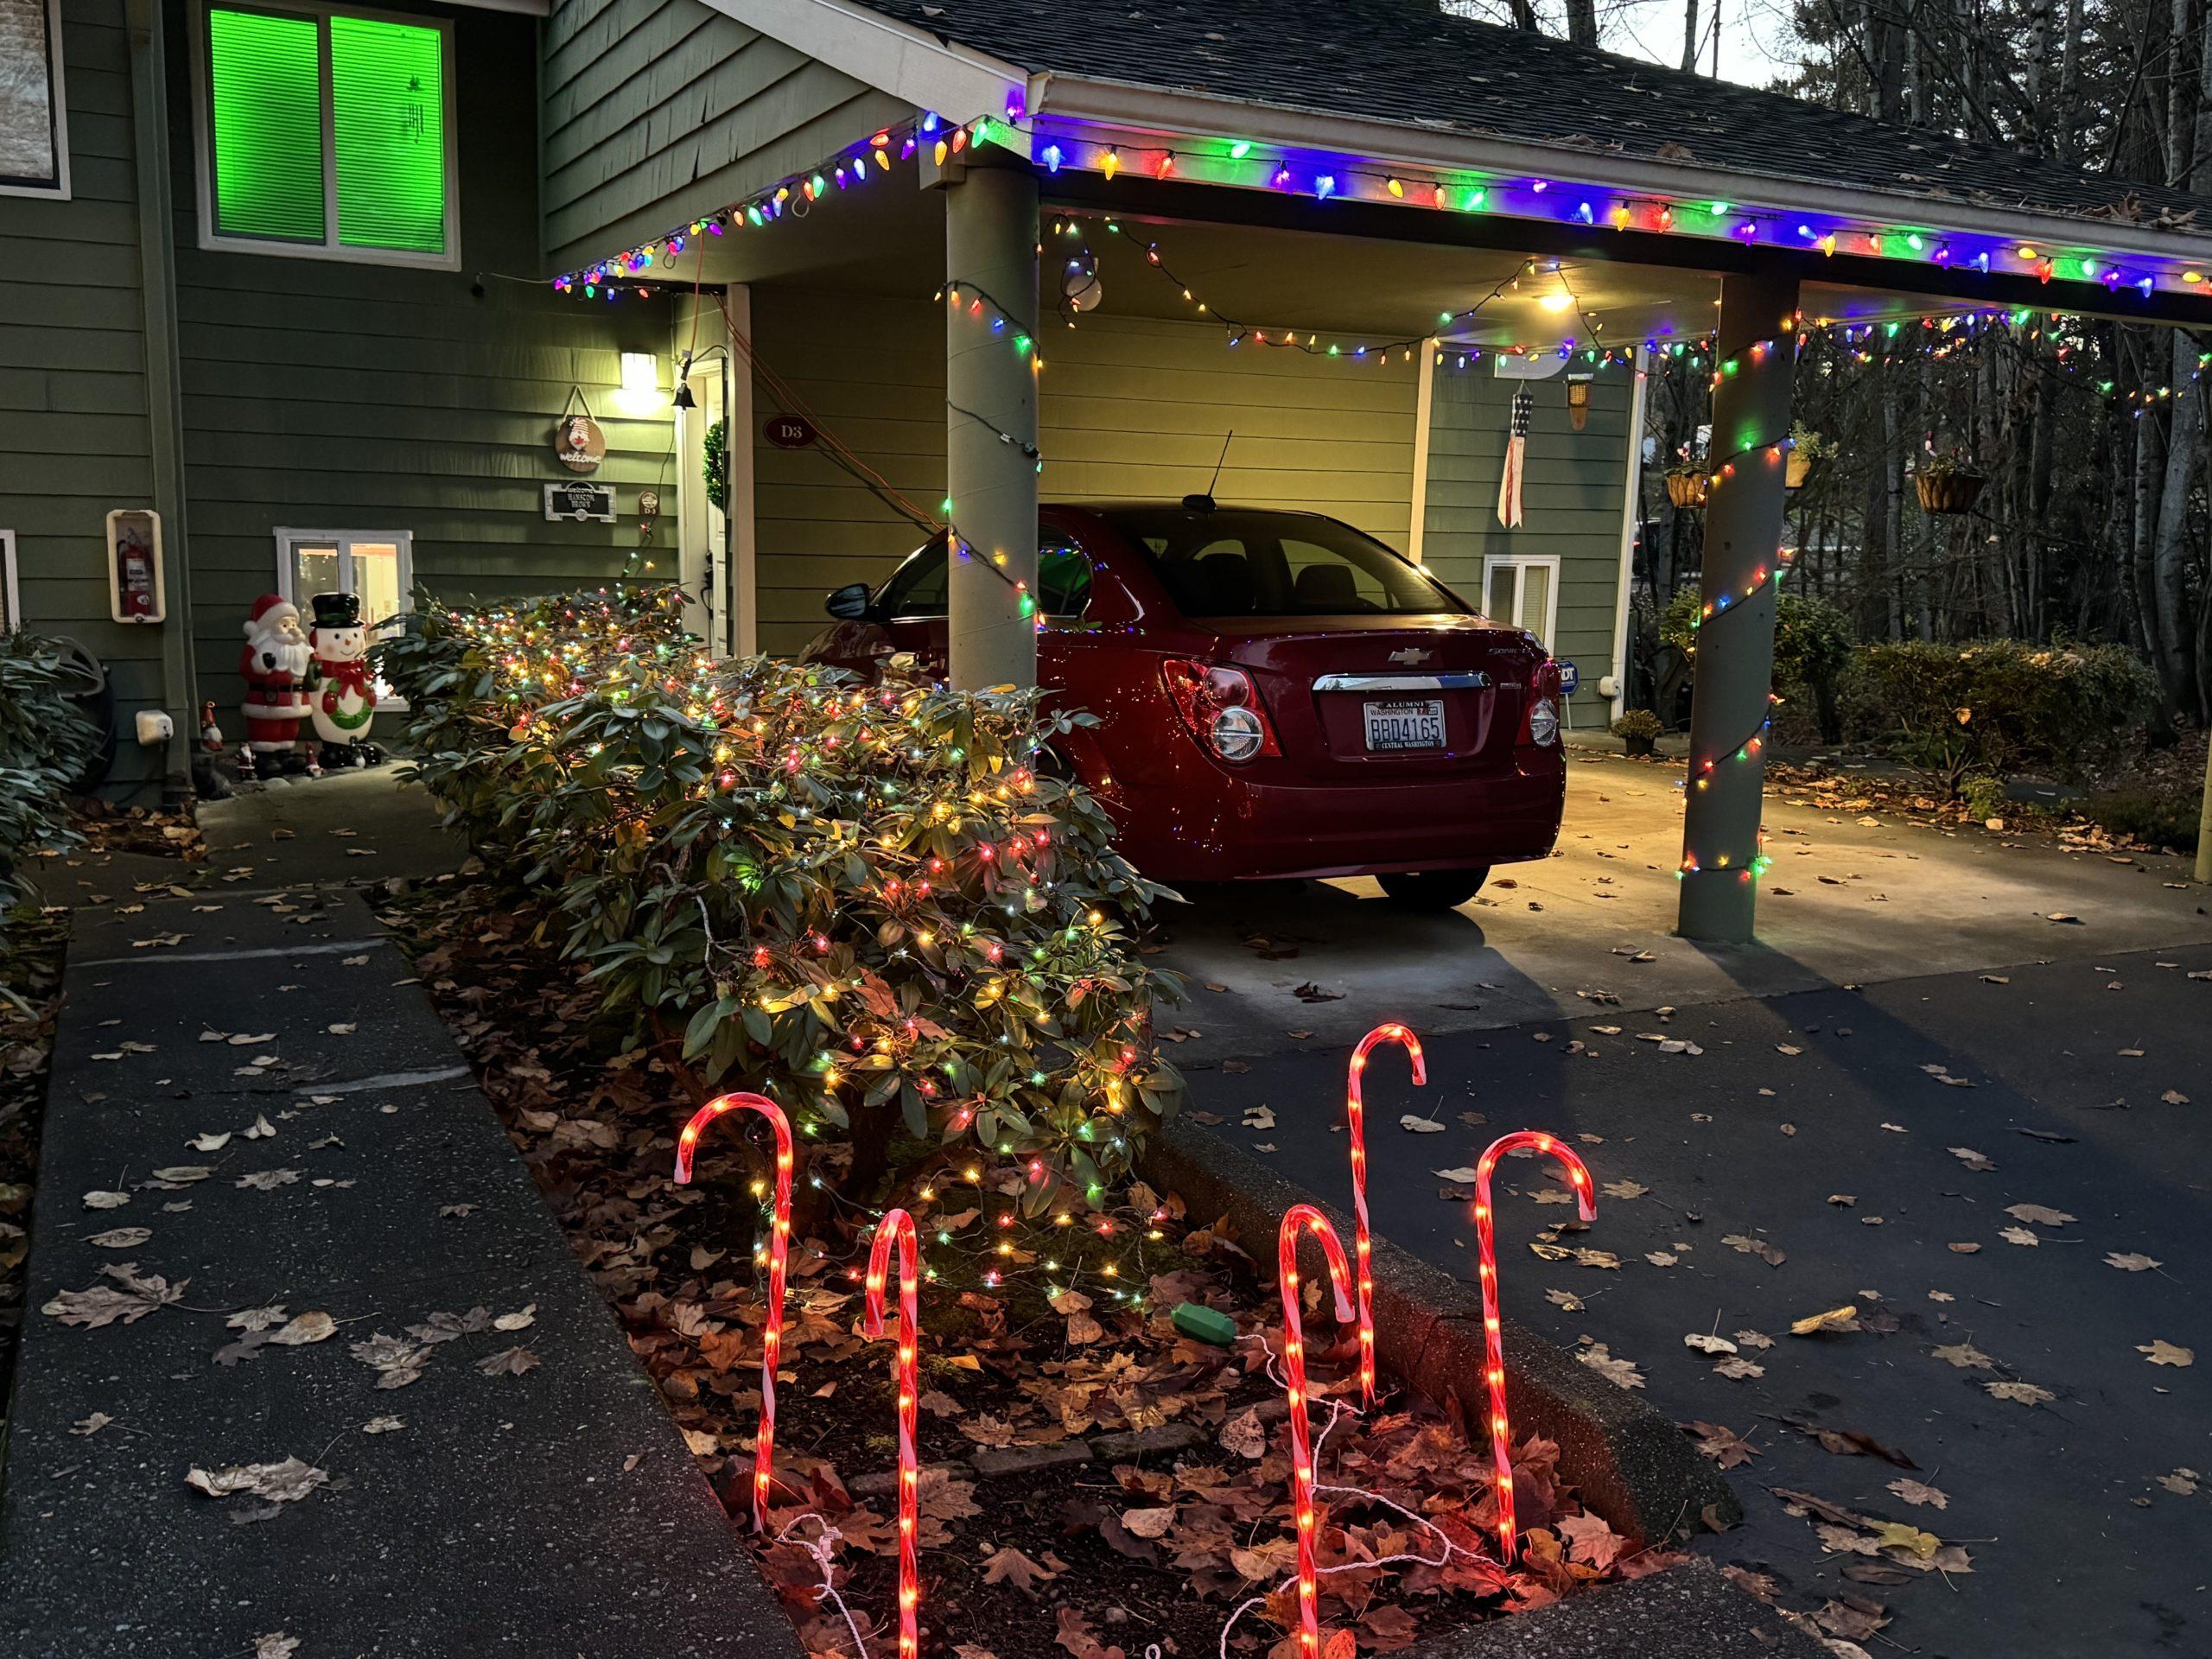 The front of our house, 1/4 of a condo fourplex, with colored holiday lights strung around the carport and over bushes by a walkway, lit candy canes in front of the bush, and Santa and snowman figures near the front door.